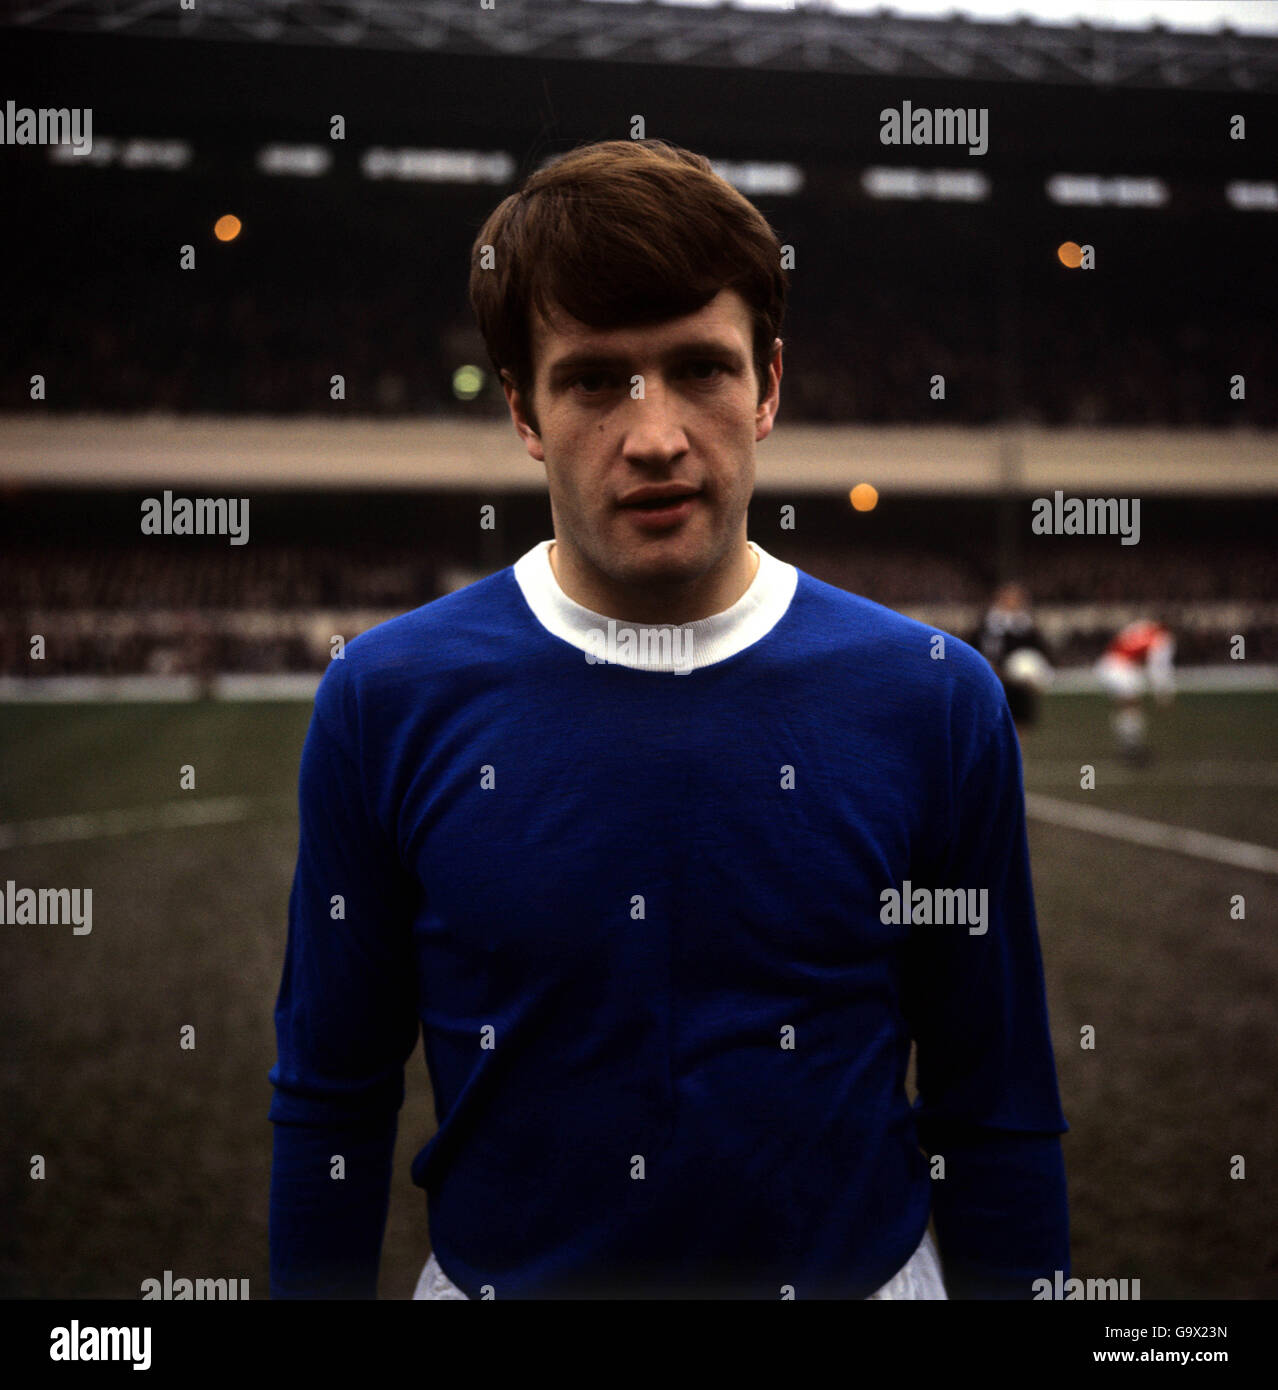 Football - football League Division One - Arsenal / Everton - Highbury.Arsenal contre Everton à Highbury.Tommy Wright, Everton 7/12/1968 Banque D'Images